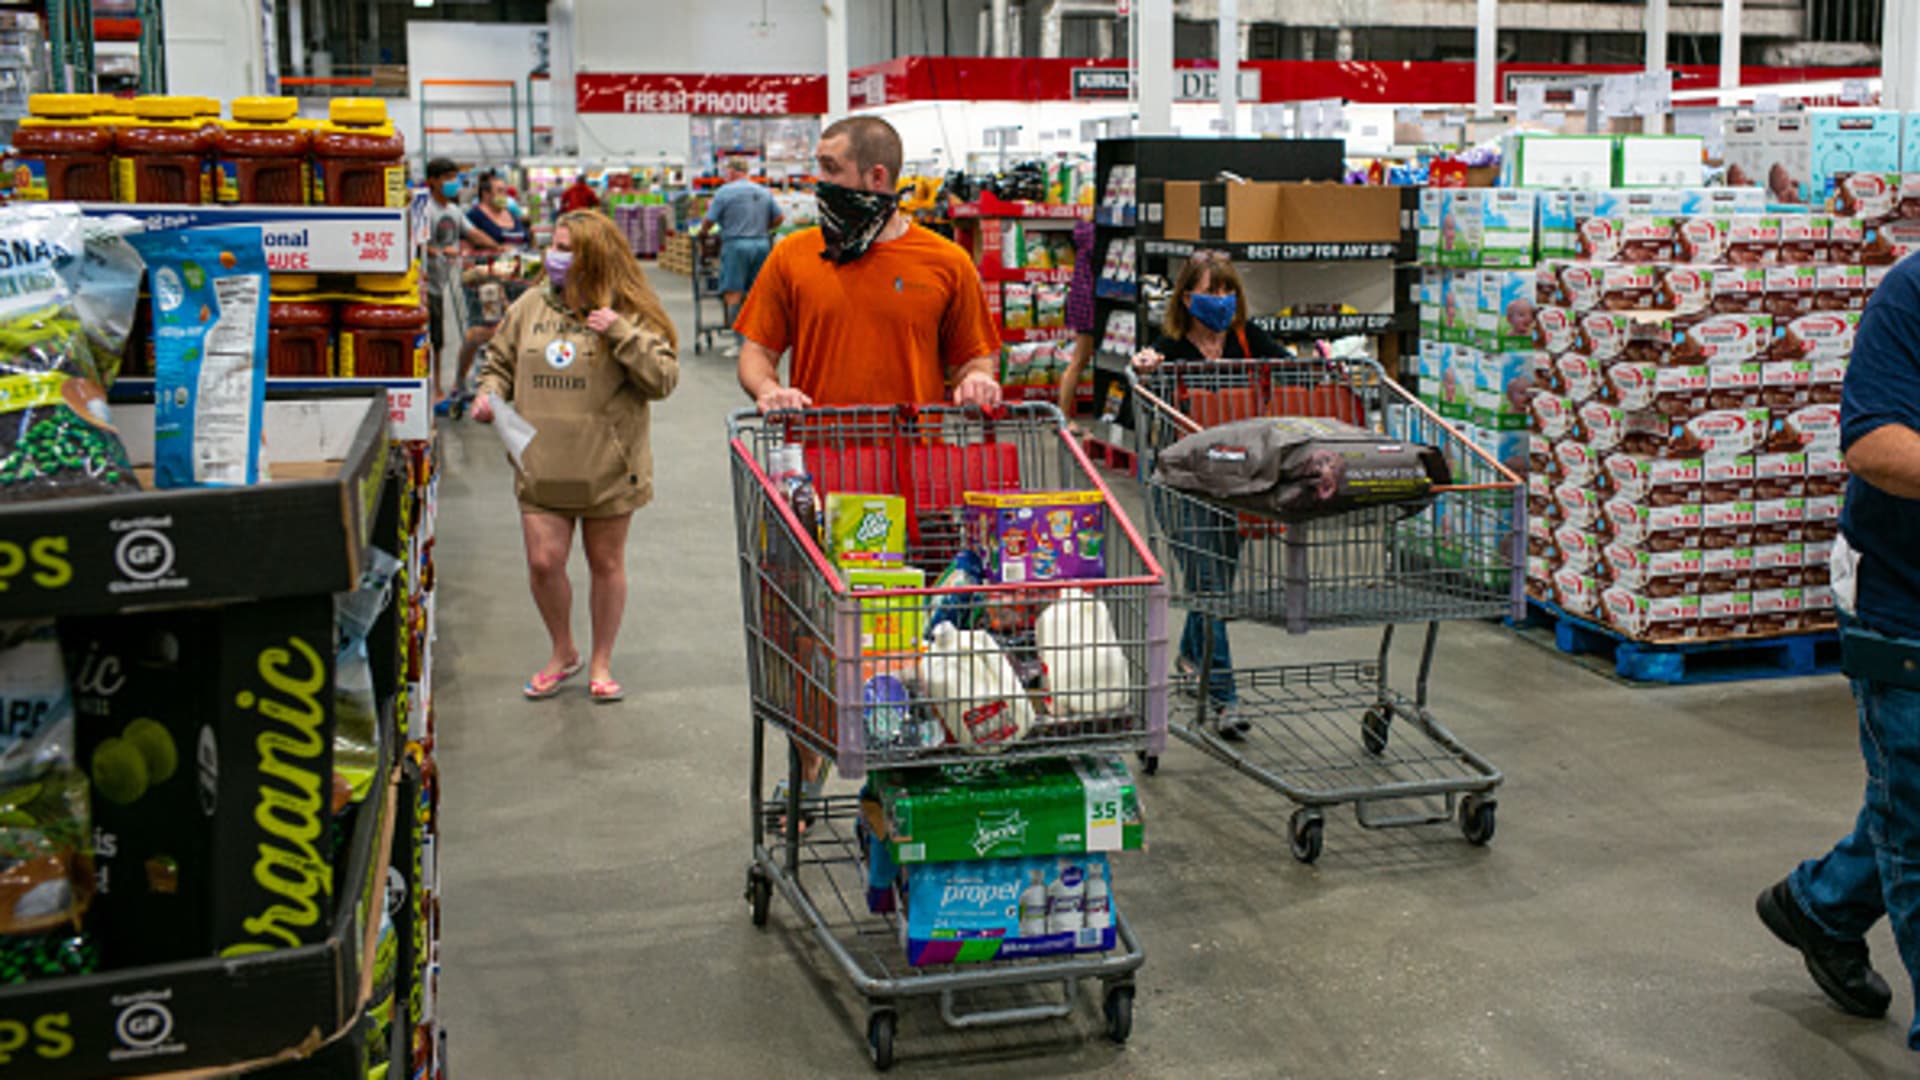 Shoppers search for items at a Costco Wholesale store August 4, 2020 in Colchester, Vermont.